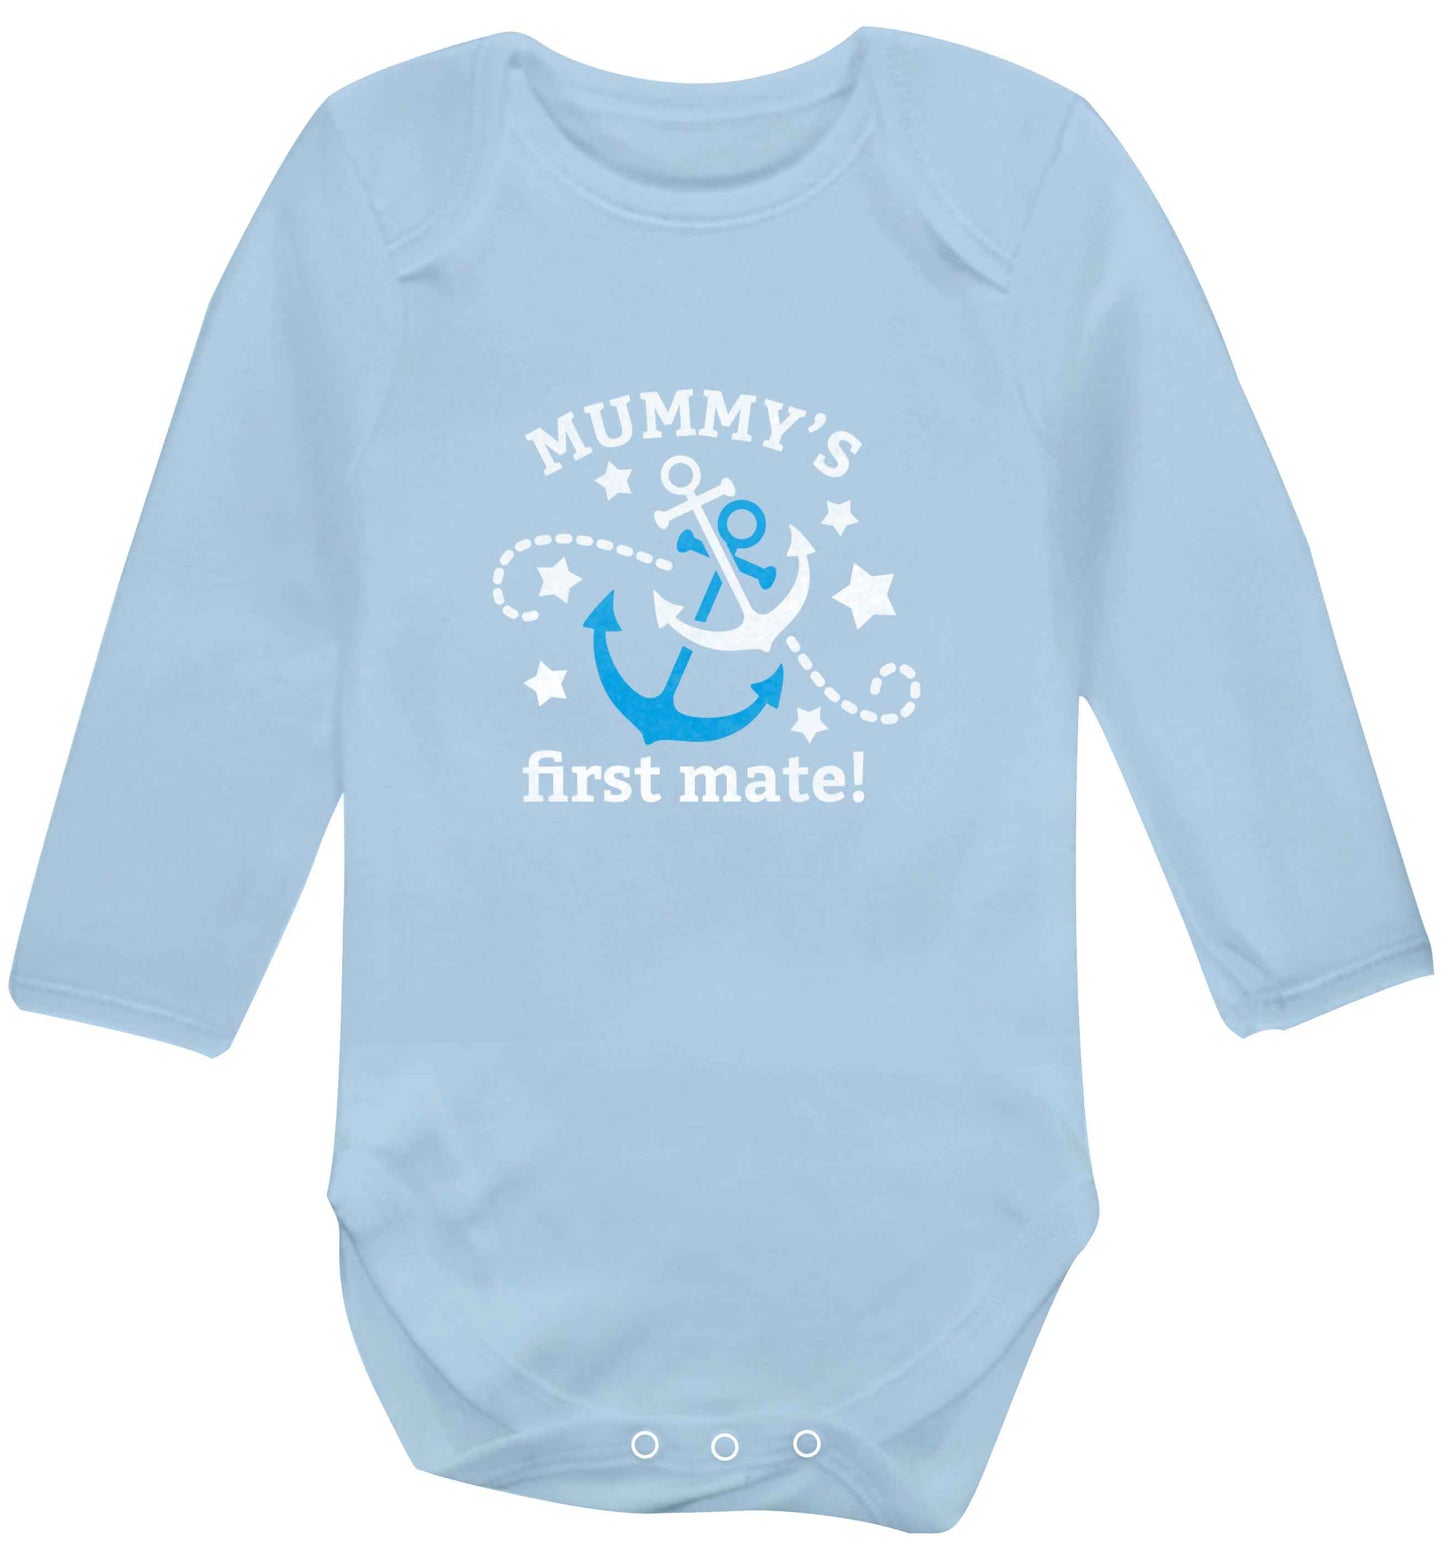 Mummy's First Mate baby vest long sleeved pale blue 6-12 months